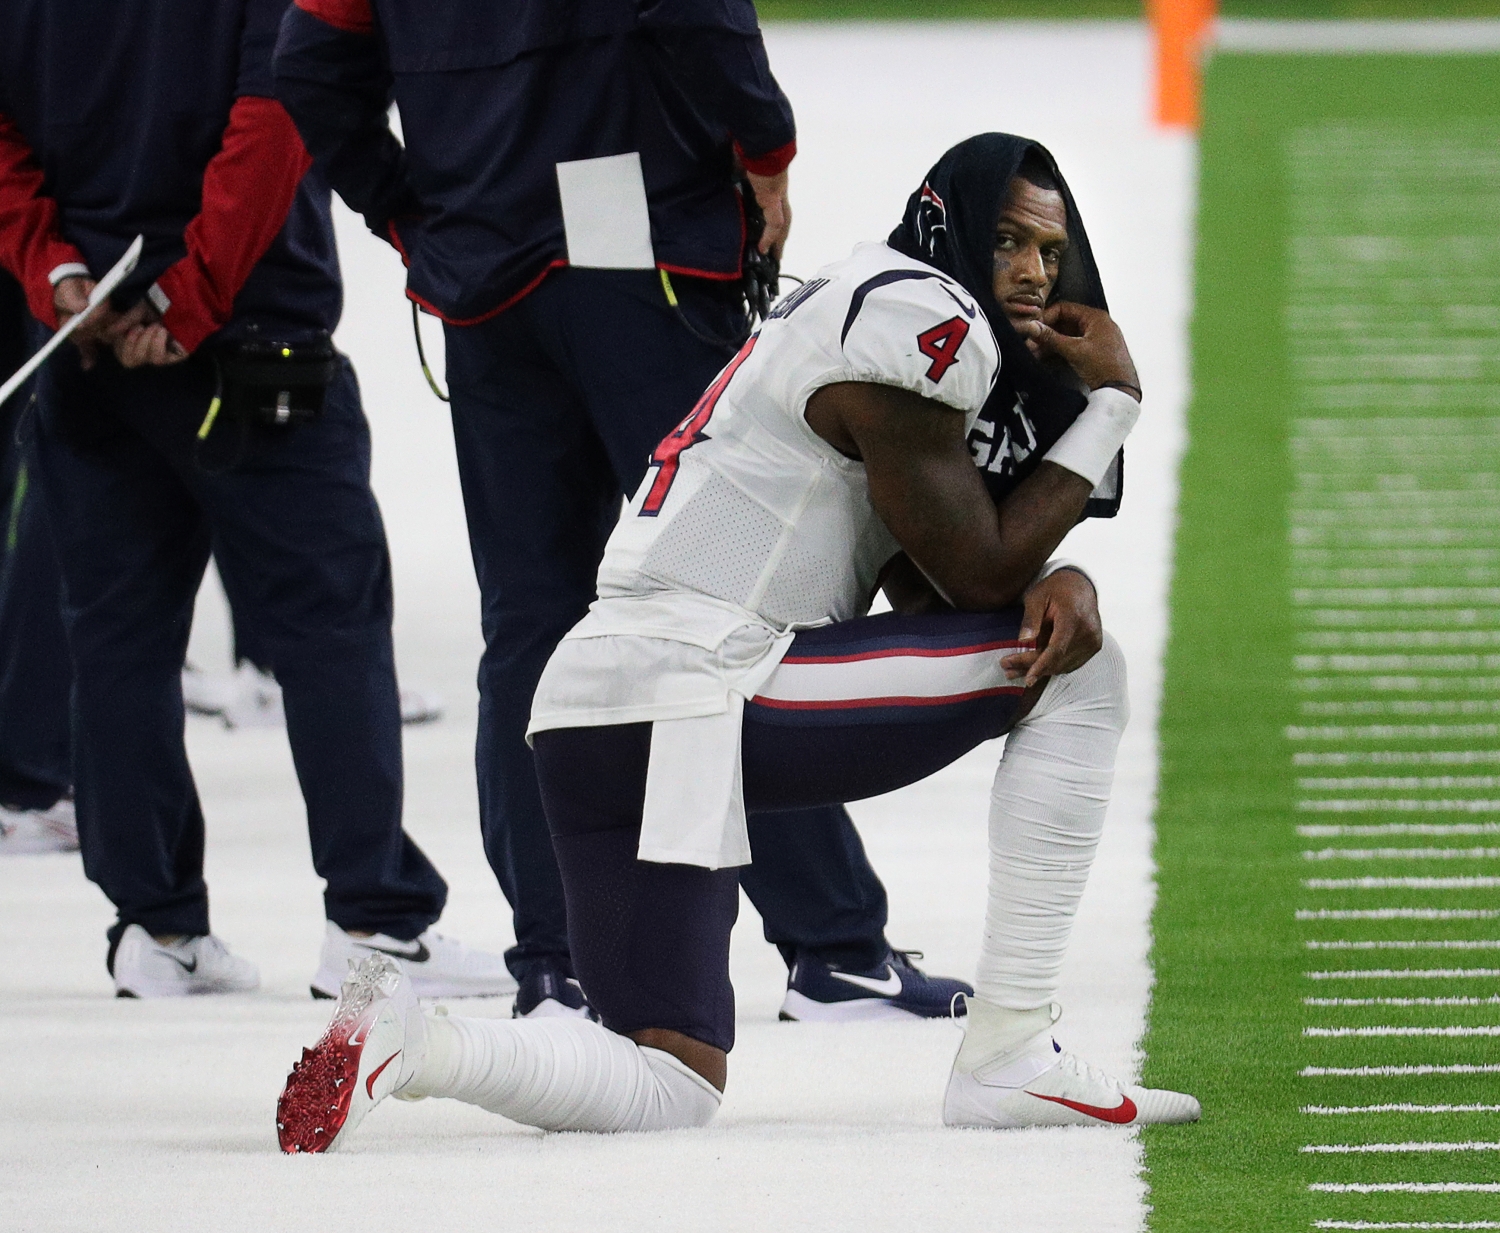 Deshaun Watson of the Houston Texans sits on the sideline during the fourth quarter against the Baltimore Ravens at NRG Stadium on September 20, 2020 in Houston, Texas.